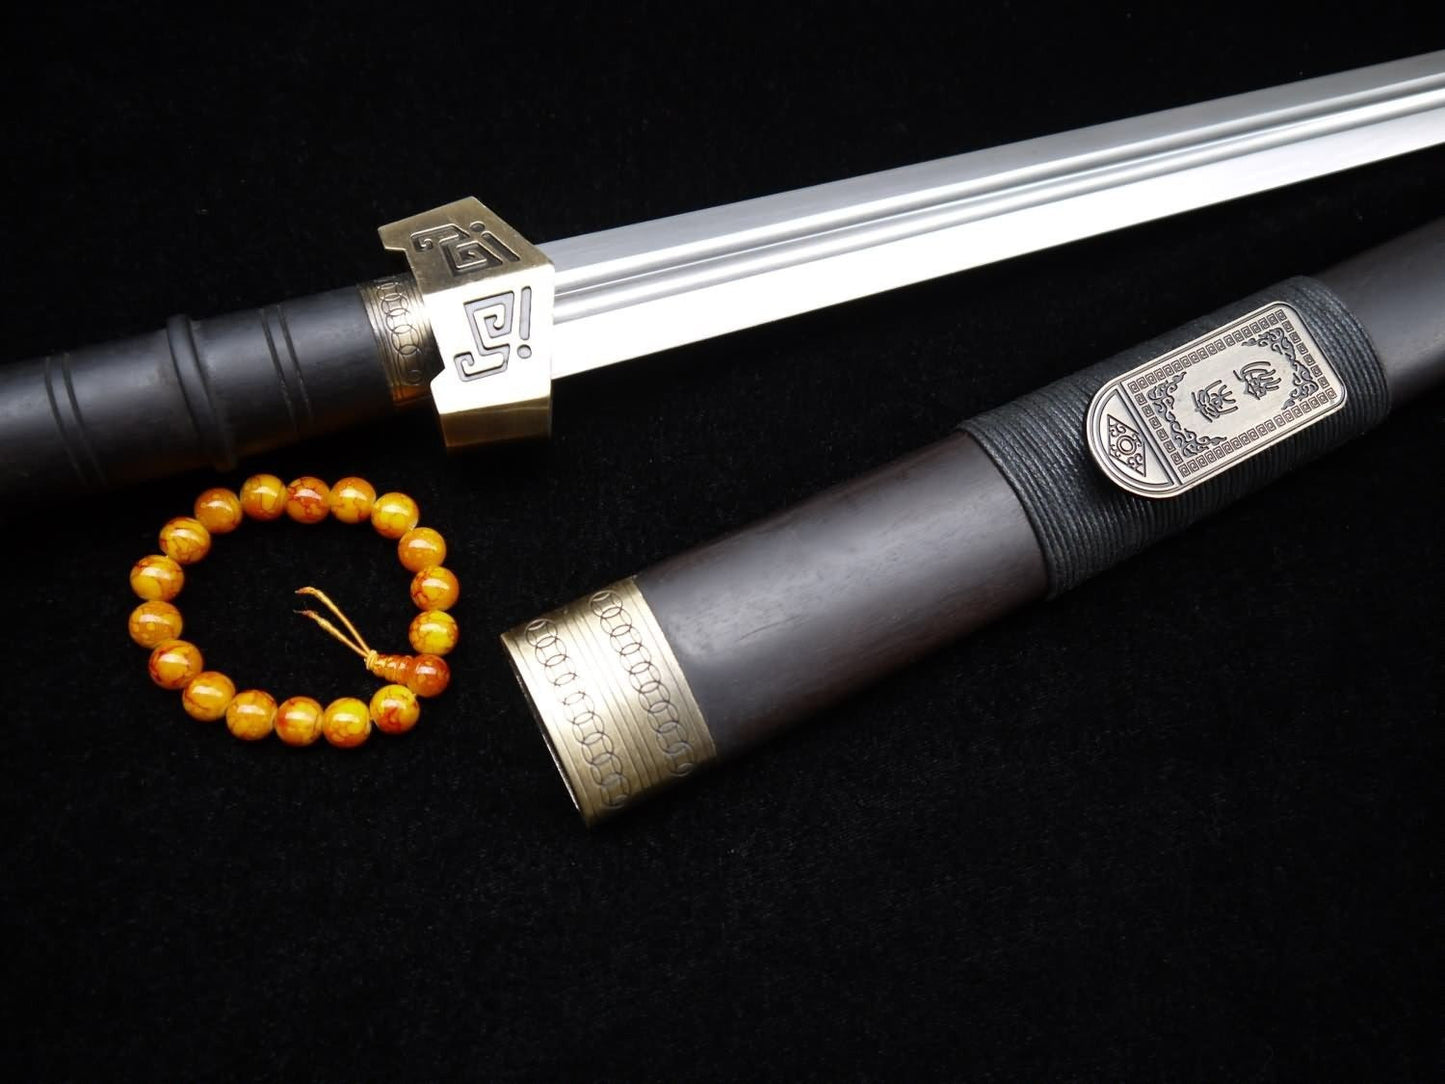 Qin sword,Pattern steel blade,Black wood scabbard,Alloy fitting,Length 30 inch - Chinese sword shop